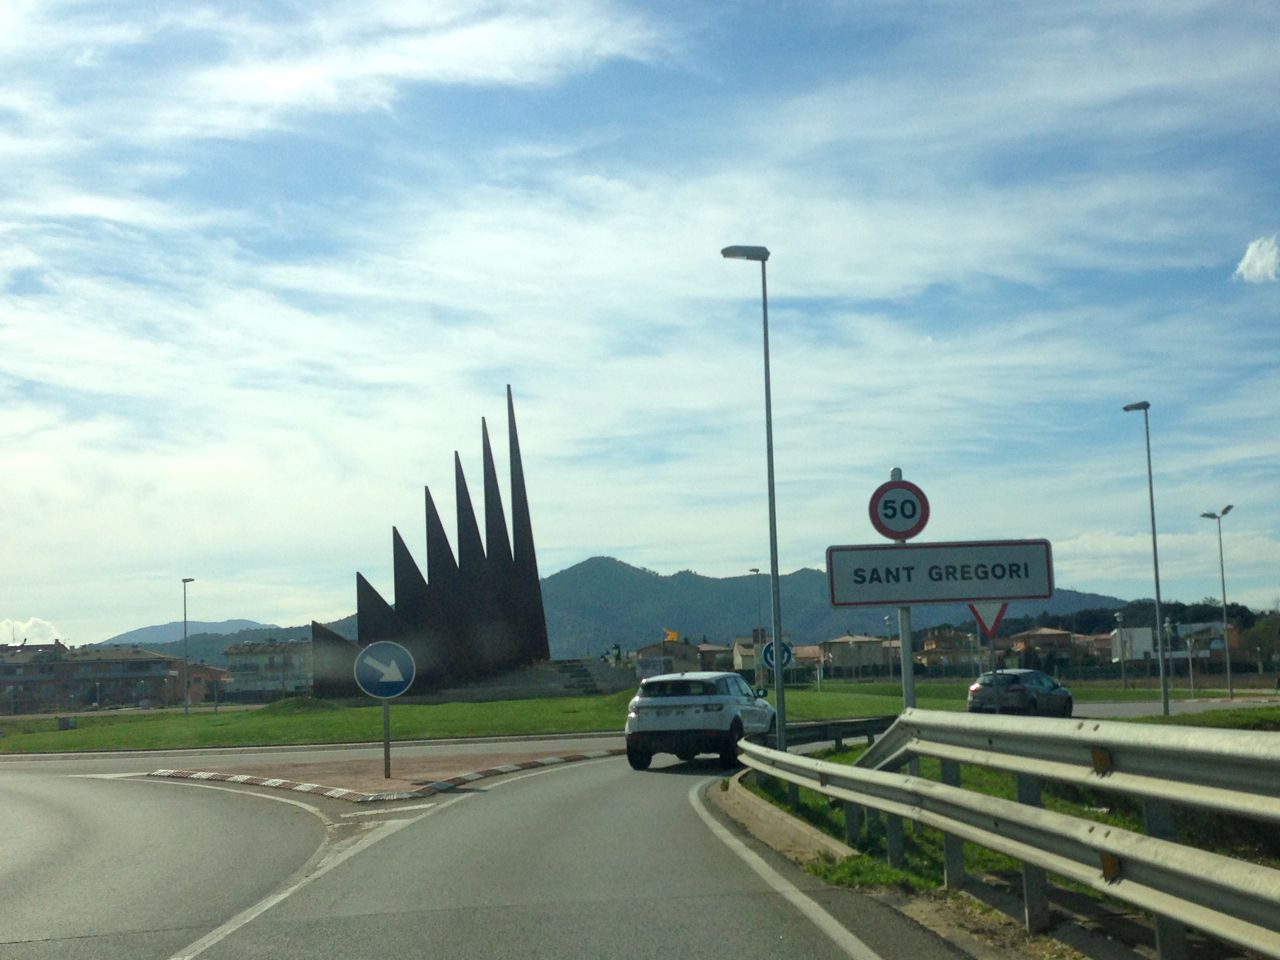 Rear view of a white SUV veering to the right, on a street, passing a Sant Gregori road sign, with mountains ahead